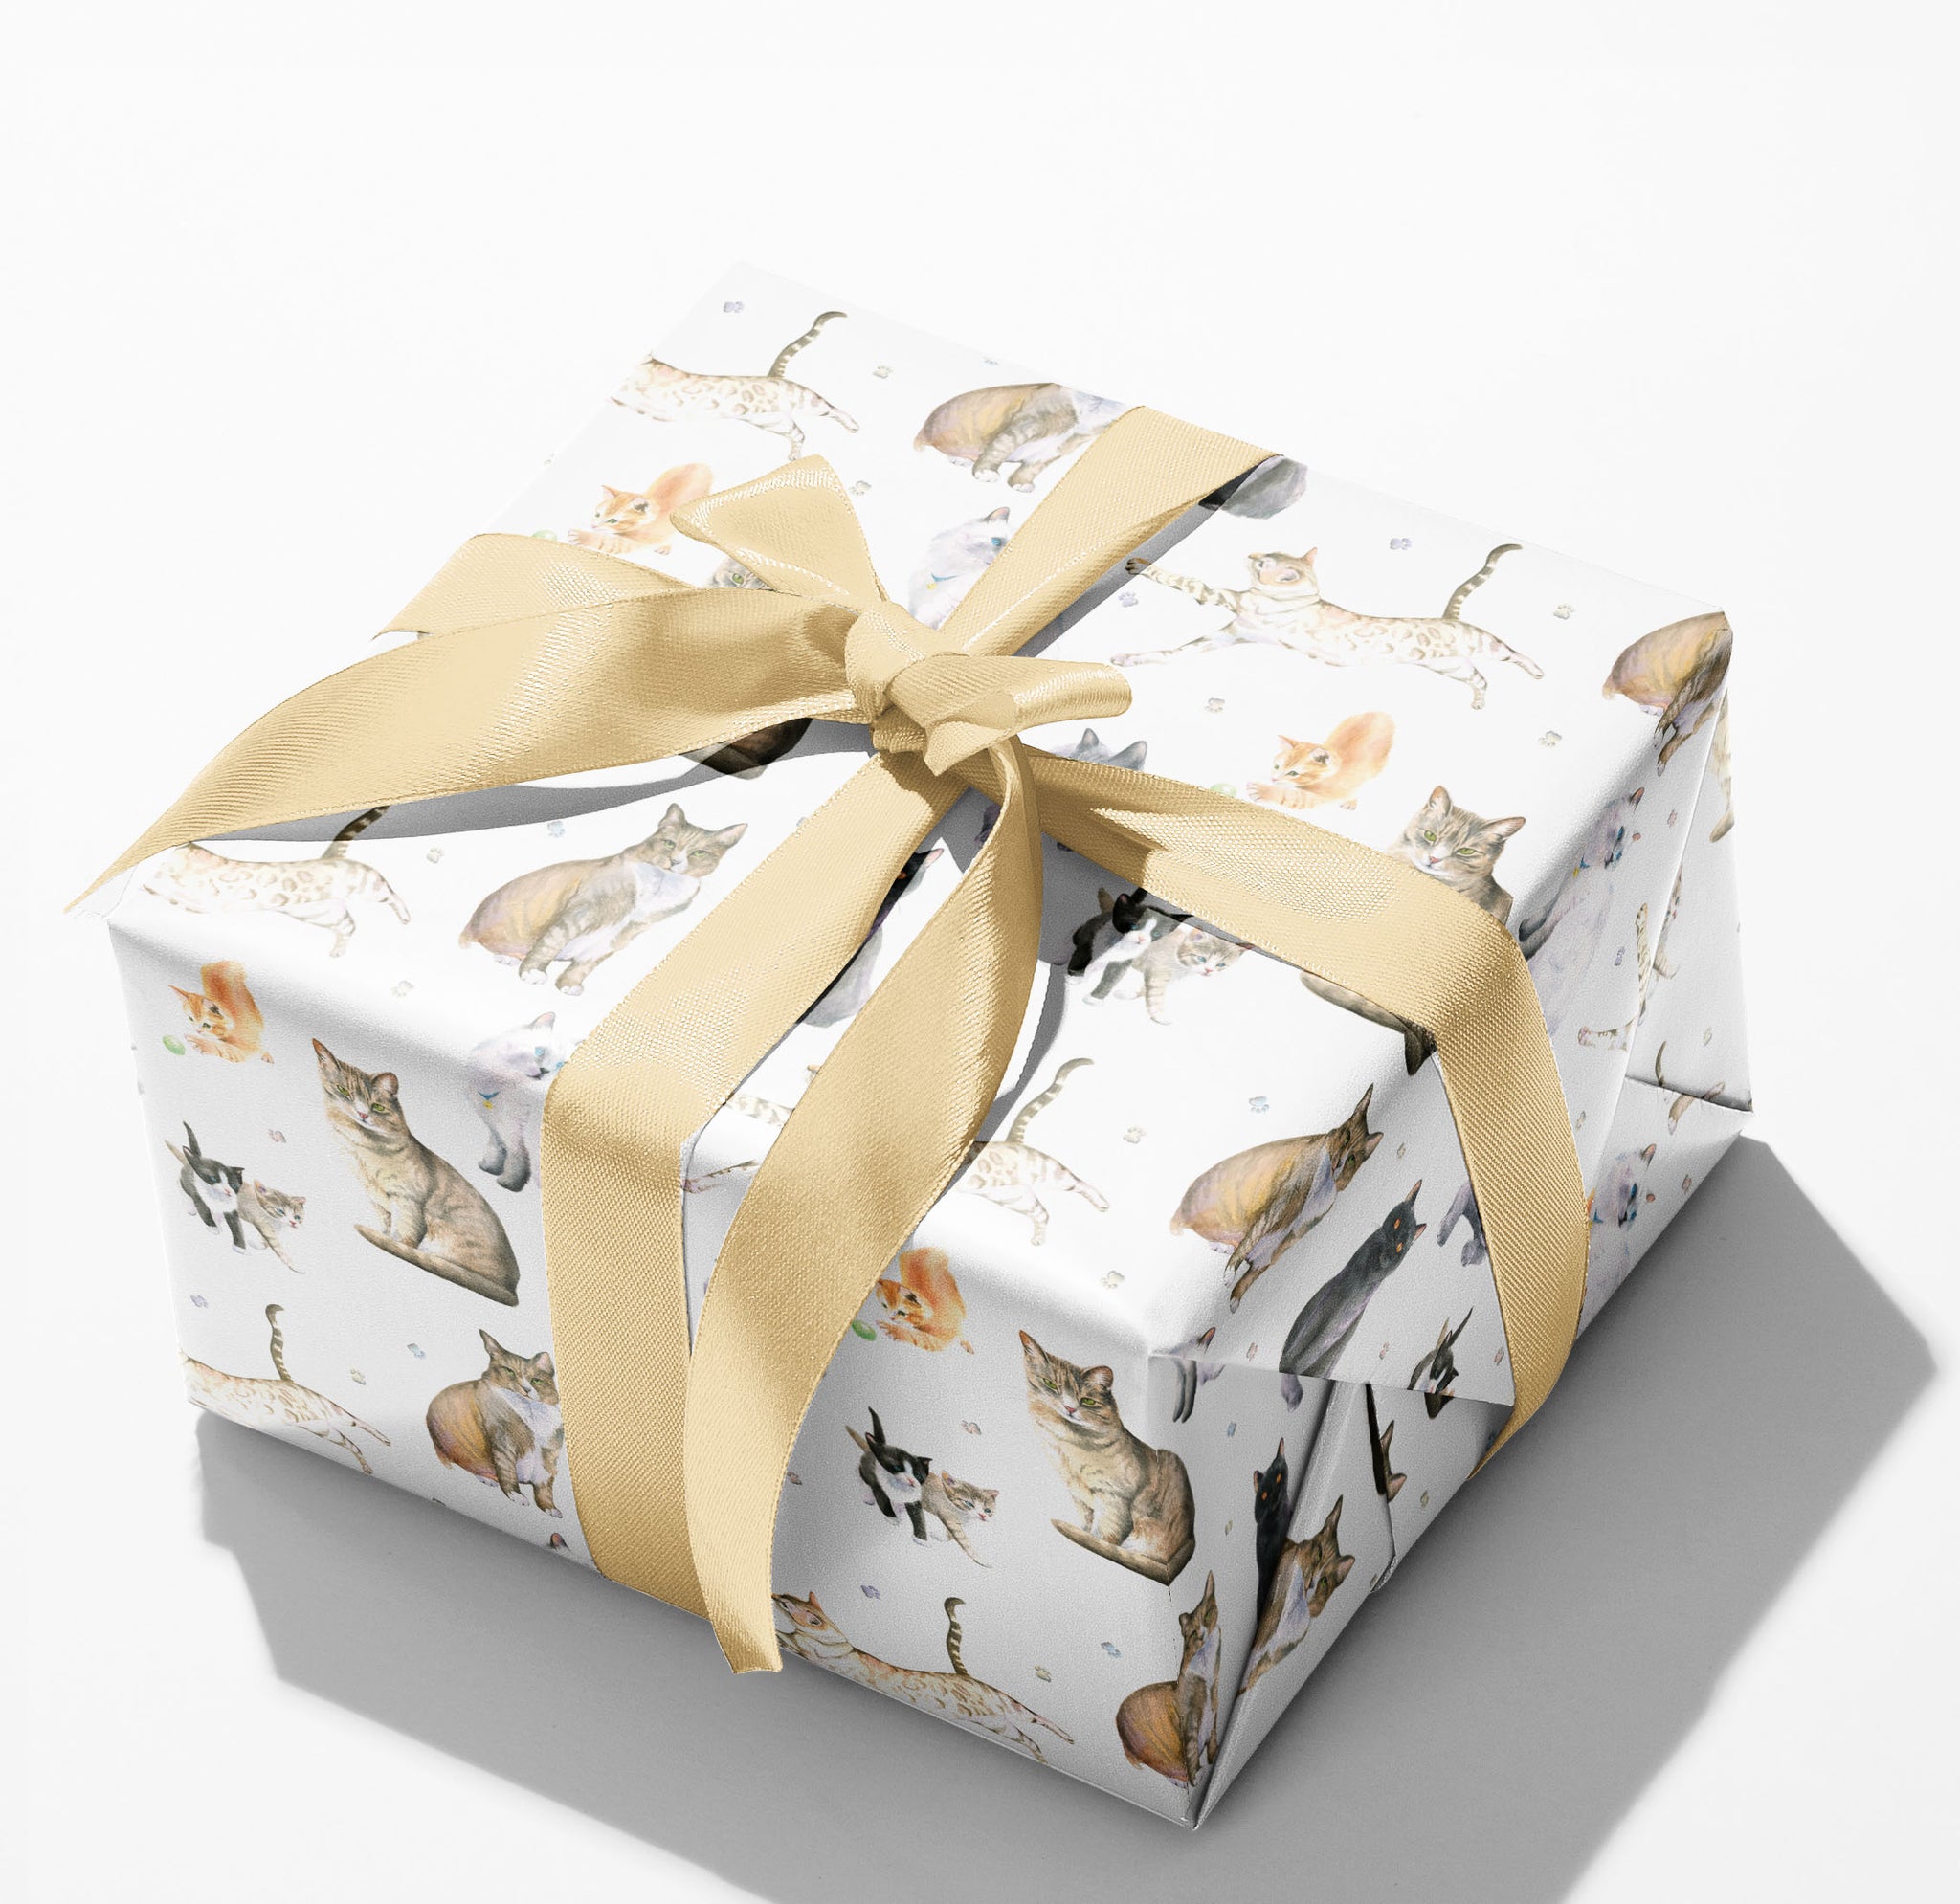 Cats and kitten quality recycled and recyclable gift wrapping paper paper 